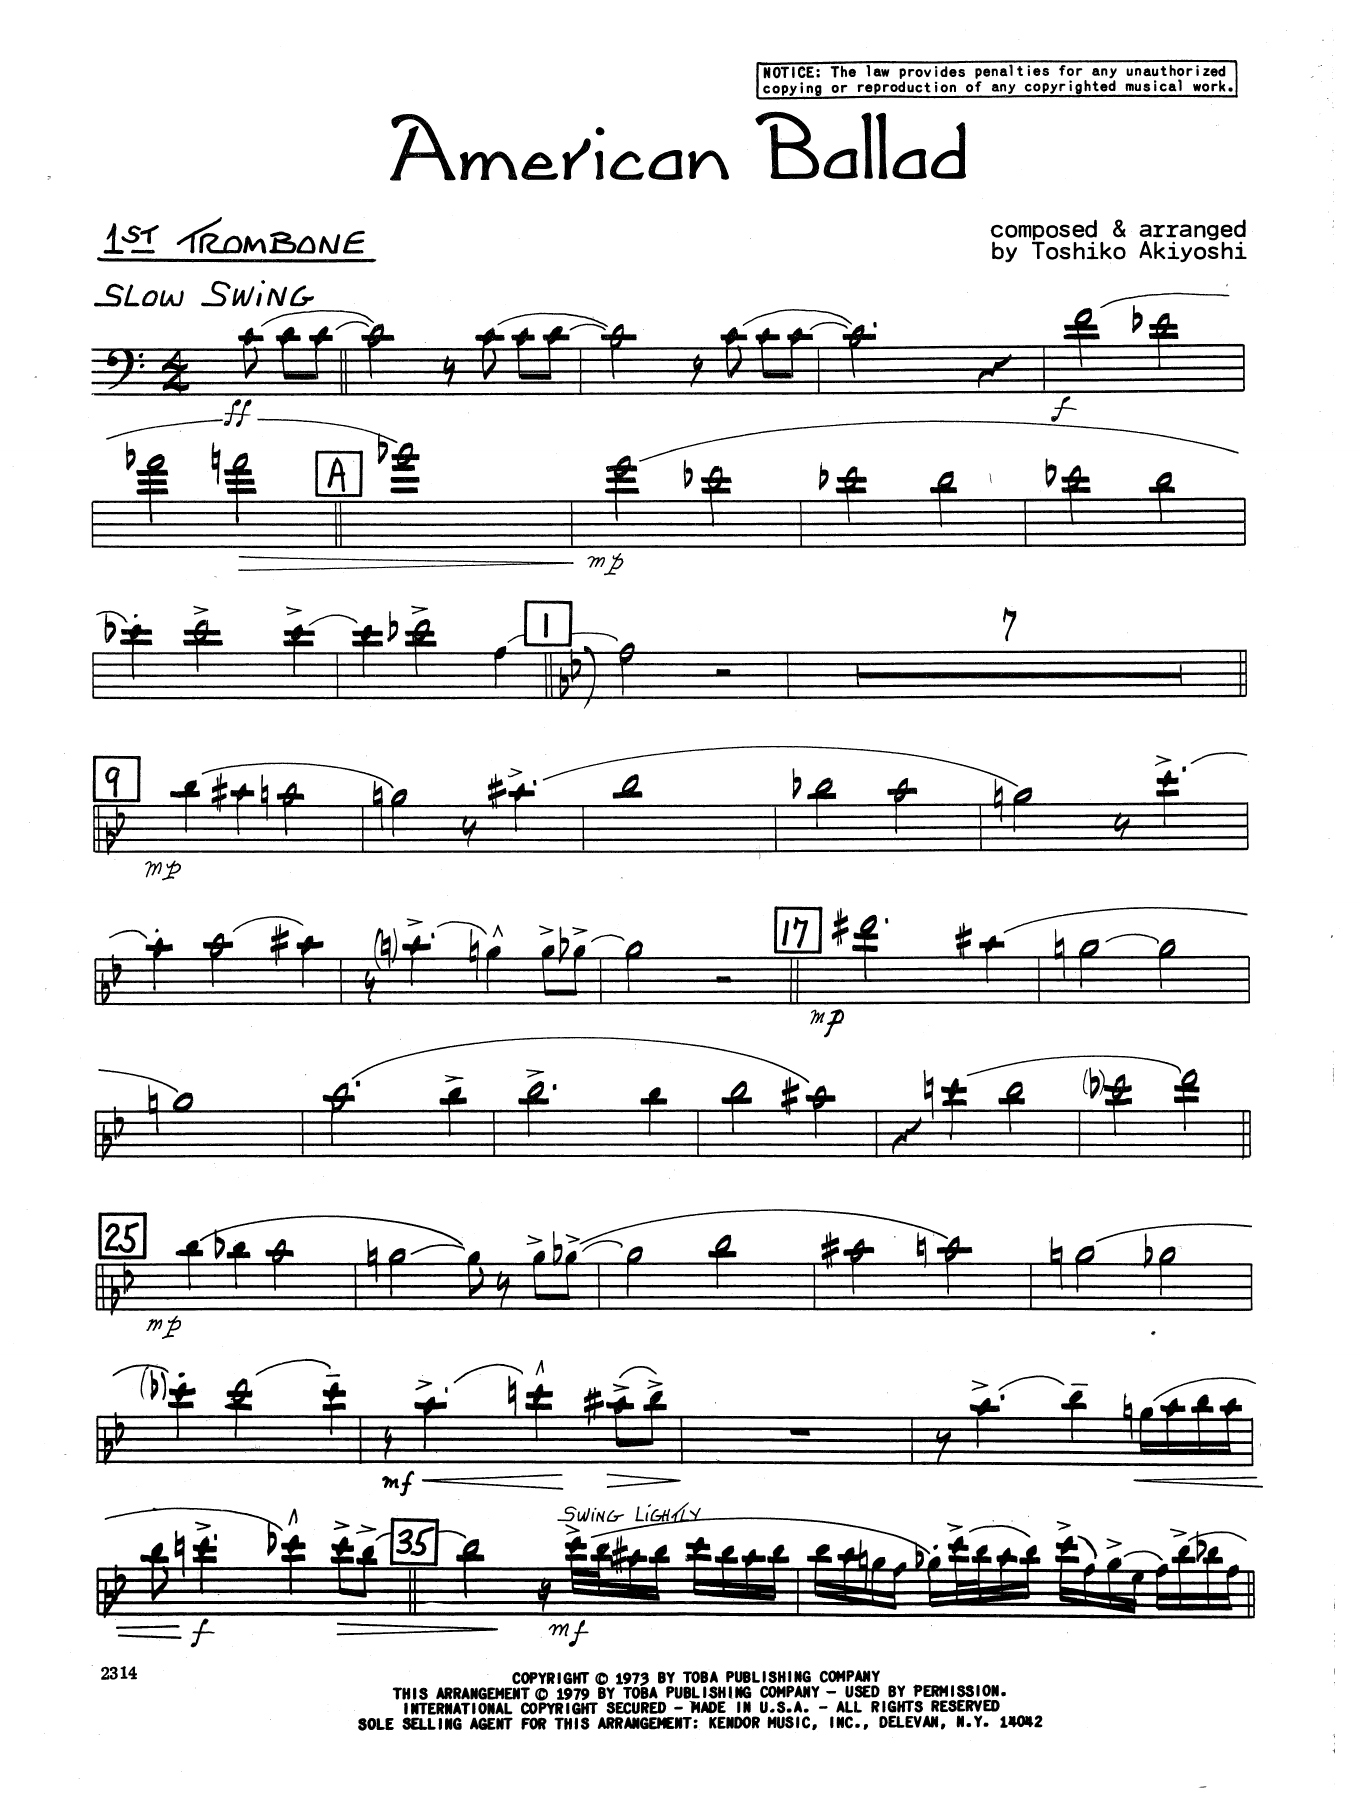 Toshiko Akiyoshi American Ballad - 1st Trombone sheet music preview music notes and score for Jazz Ensemble including 2 page(s)